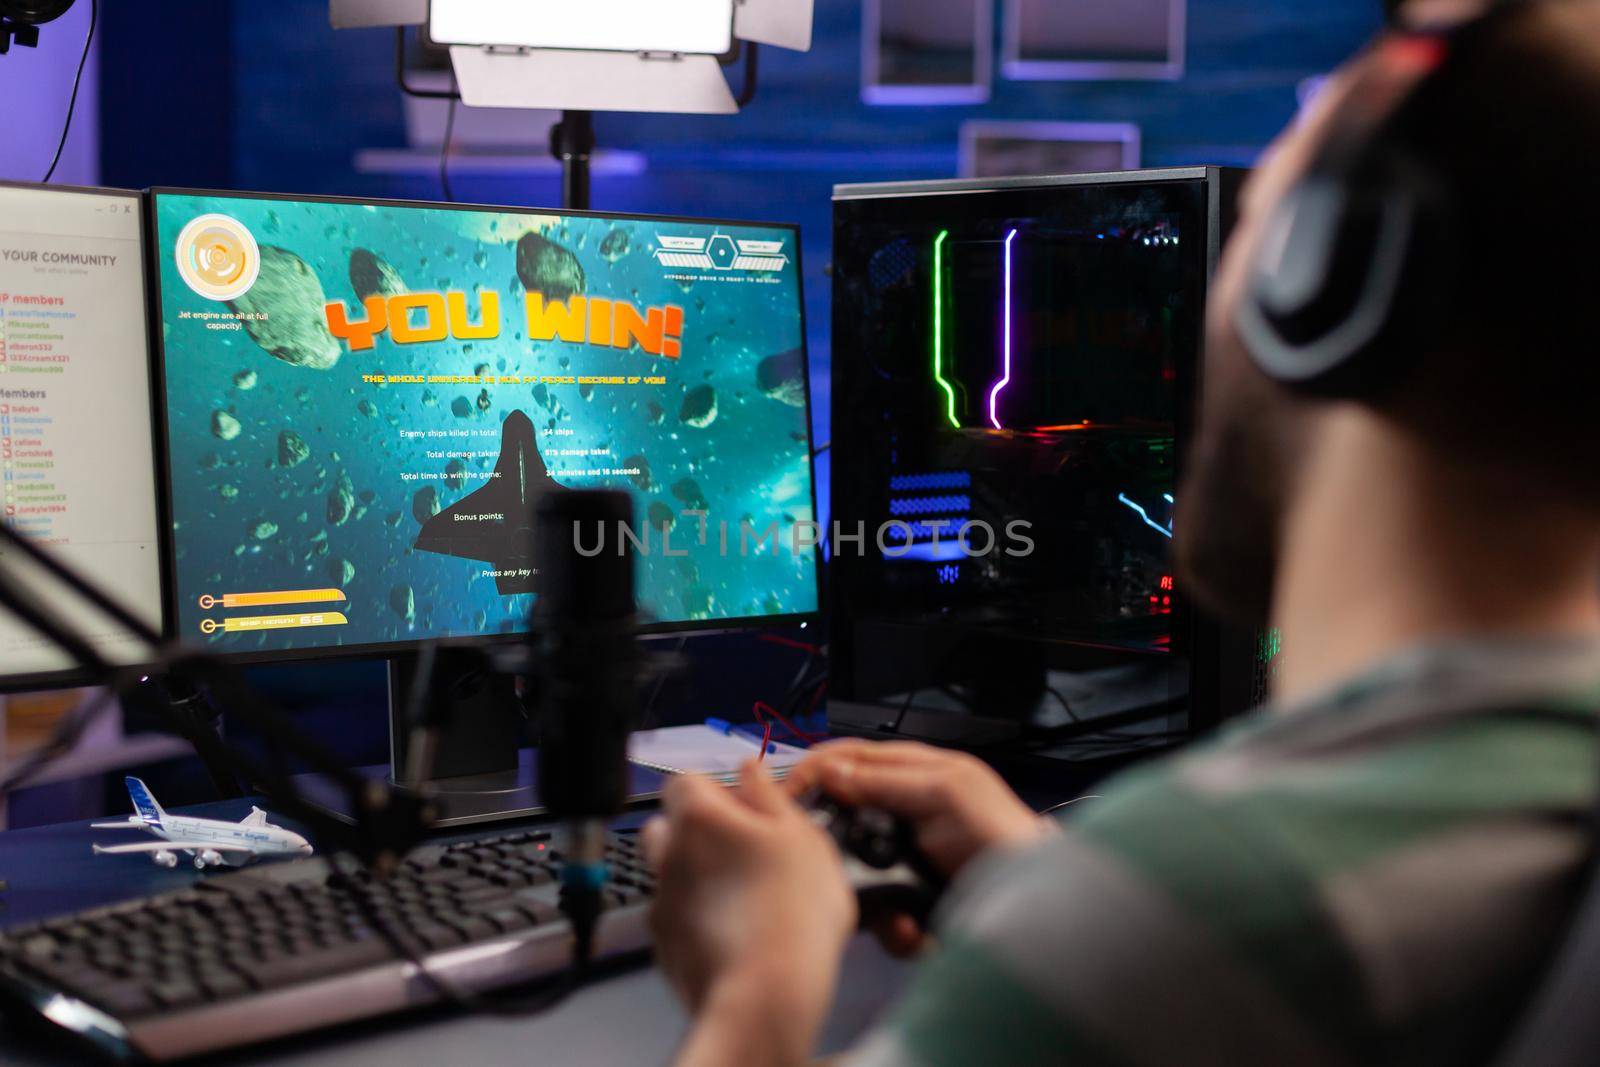 Excited streamer winning online virtual game competition of space shooter playing on powerful computer. Professional gamer using joystick for space shooter championship sitting on gamining desk